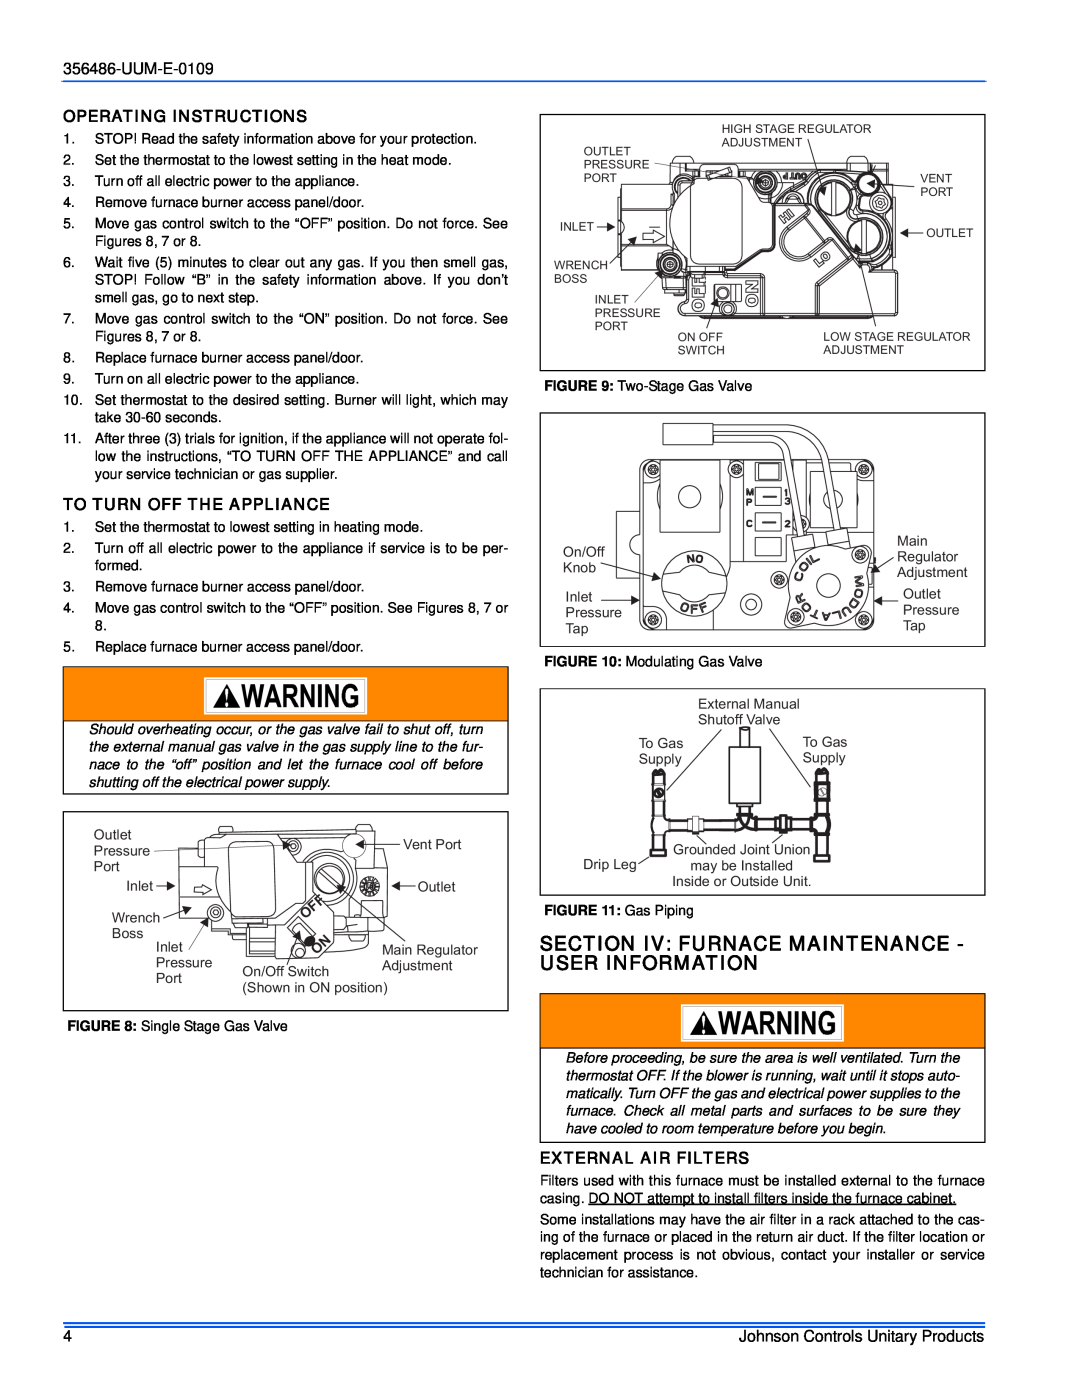 Johnson Controls 356486-UUM-E-0109 Operating Instructions, To Turn Off The Appliance, External Air Filters, Gas Piping 